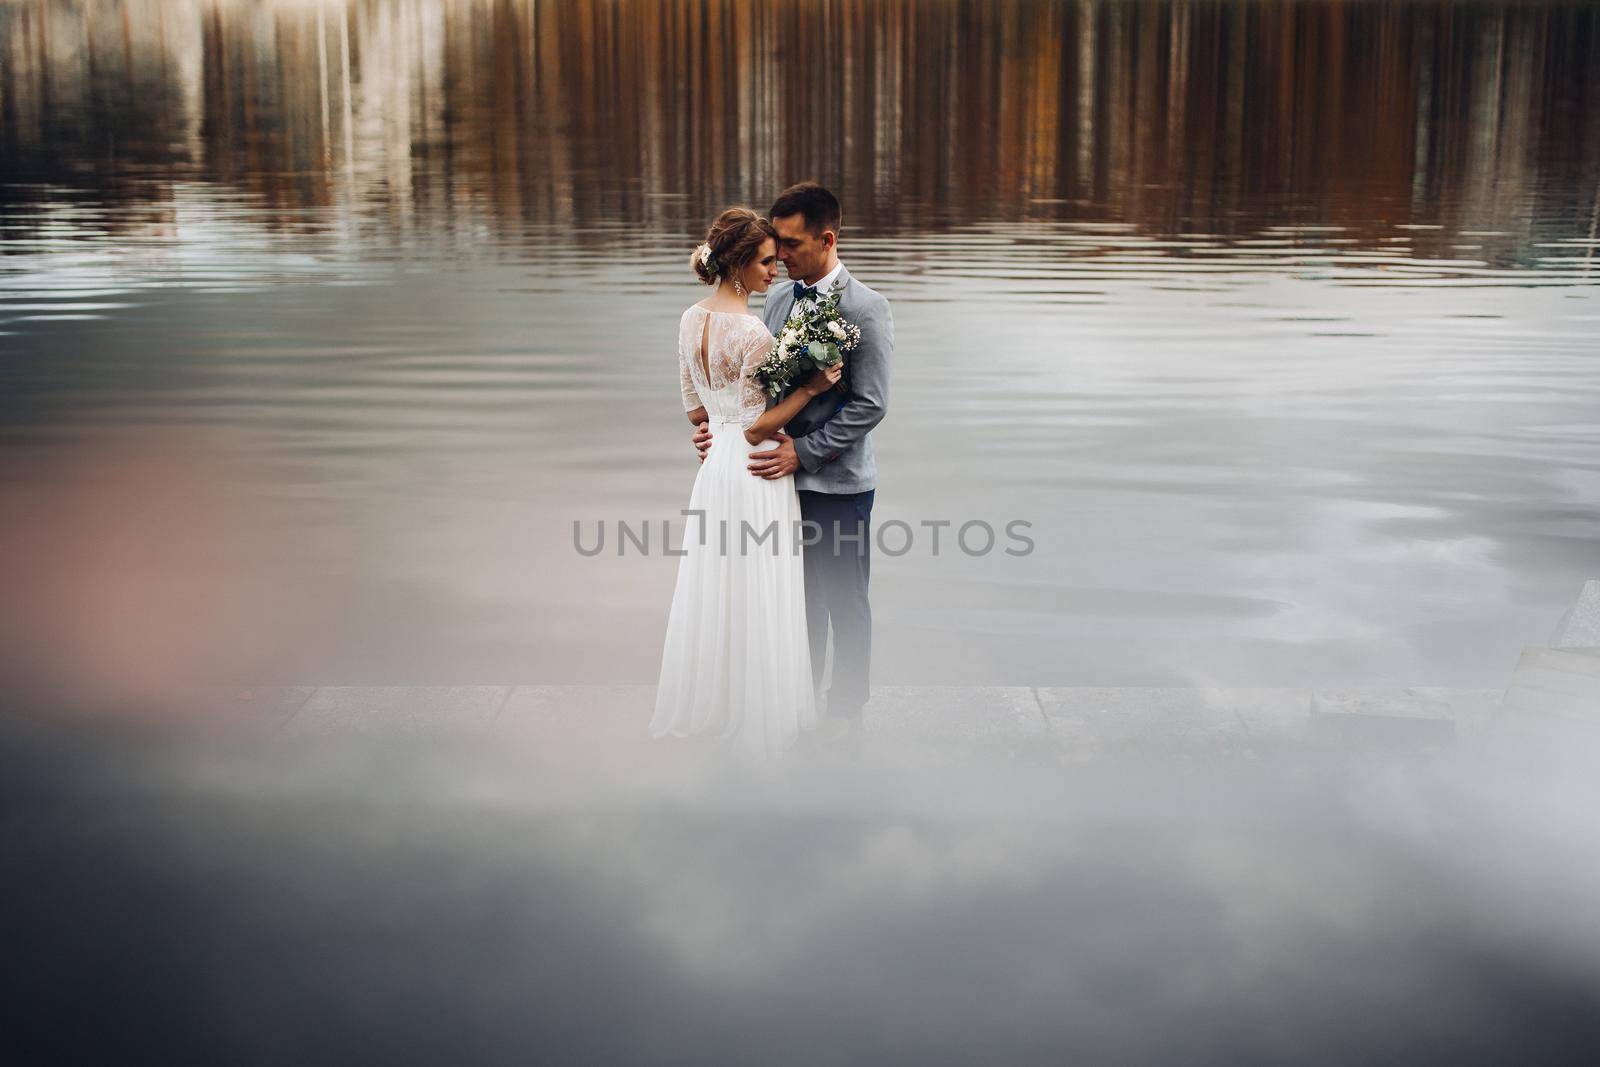 Couple bride in whire and groom in gray standing among lake. by StudioLucky